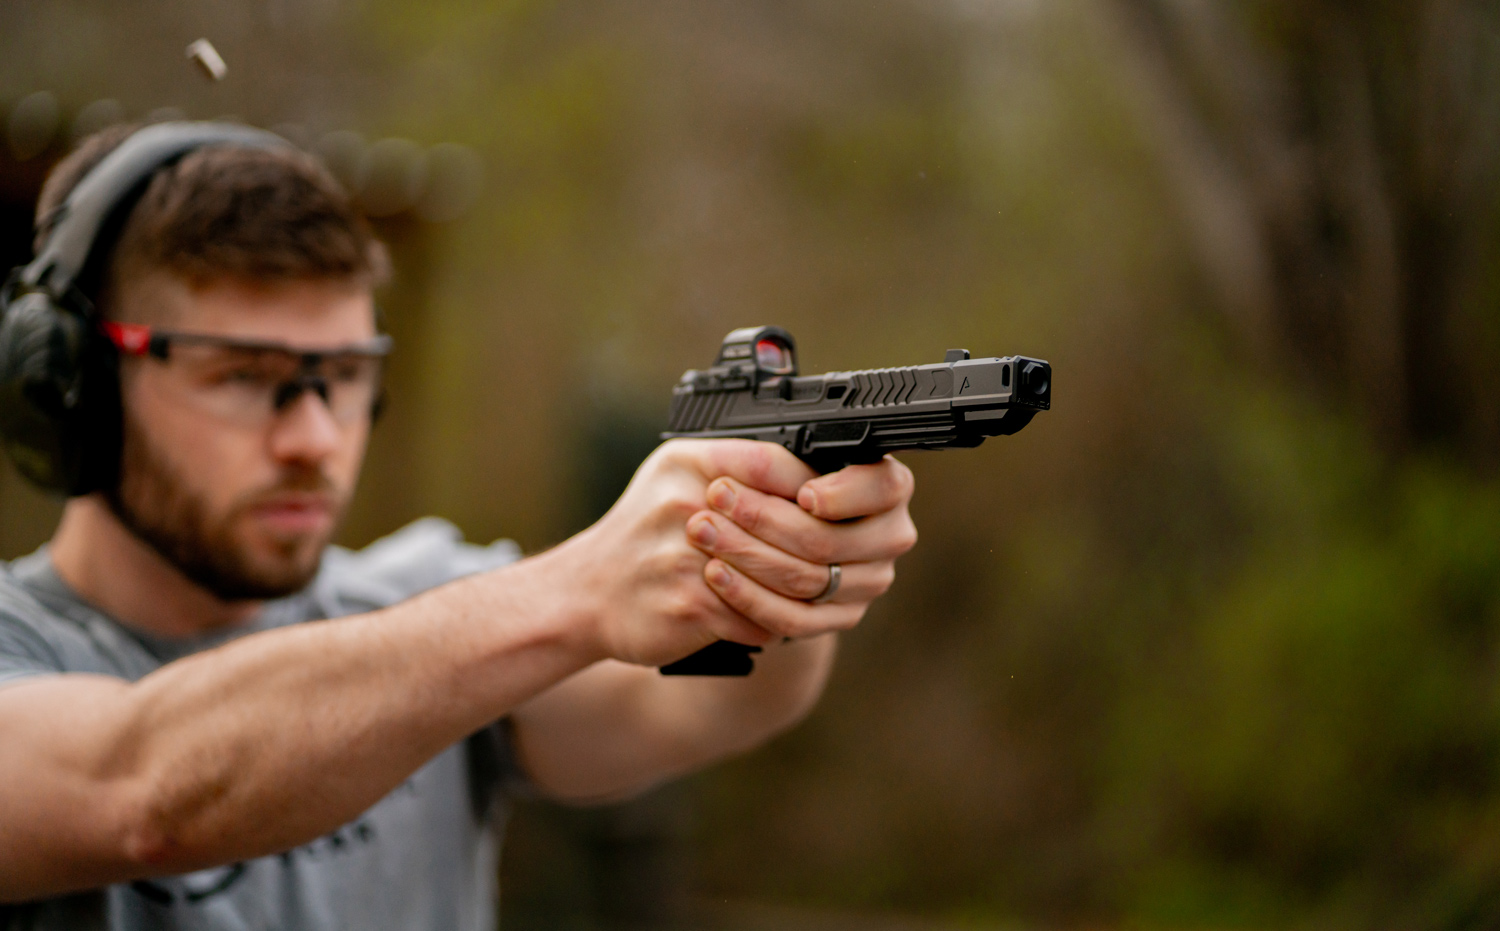 The author shooting with a pistol compensator at the range.